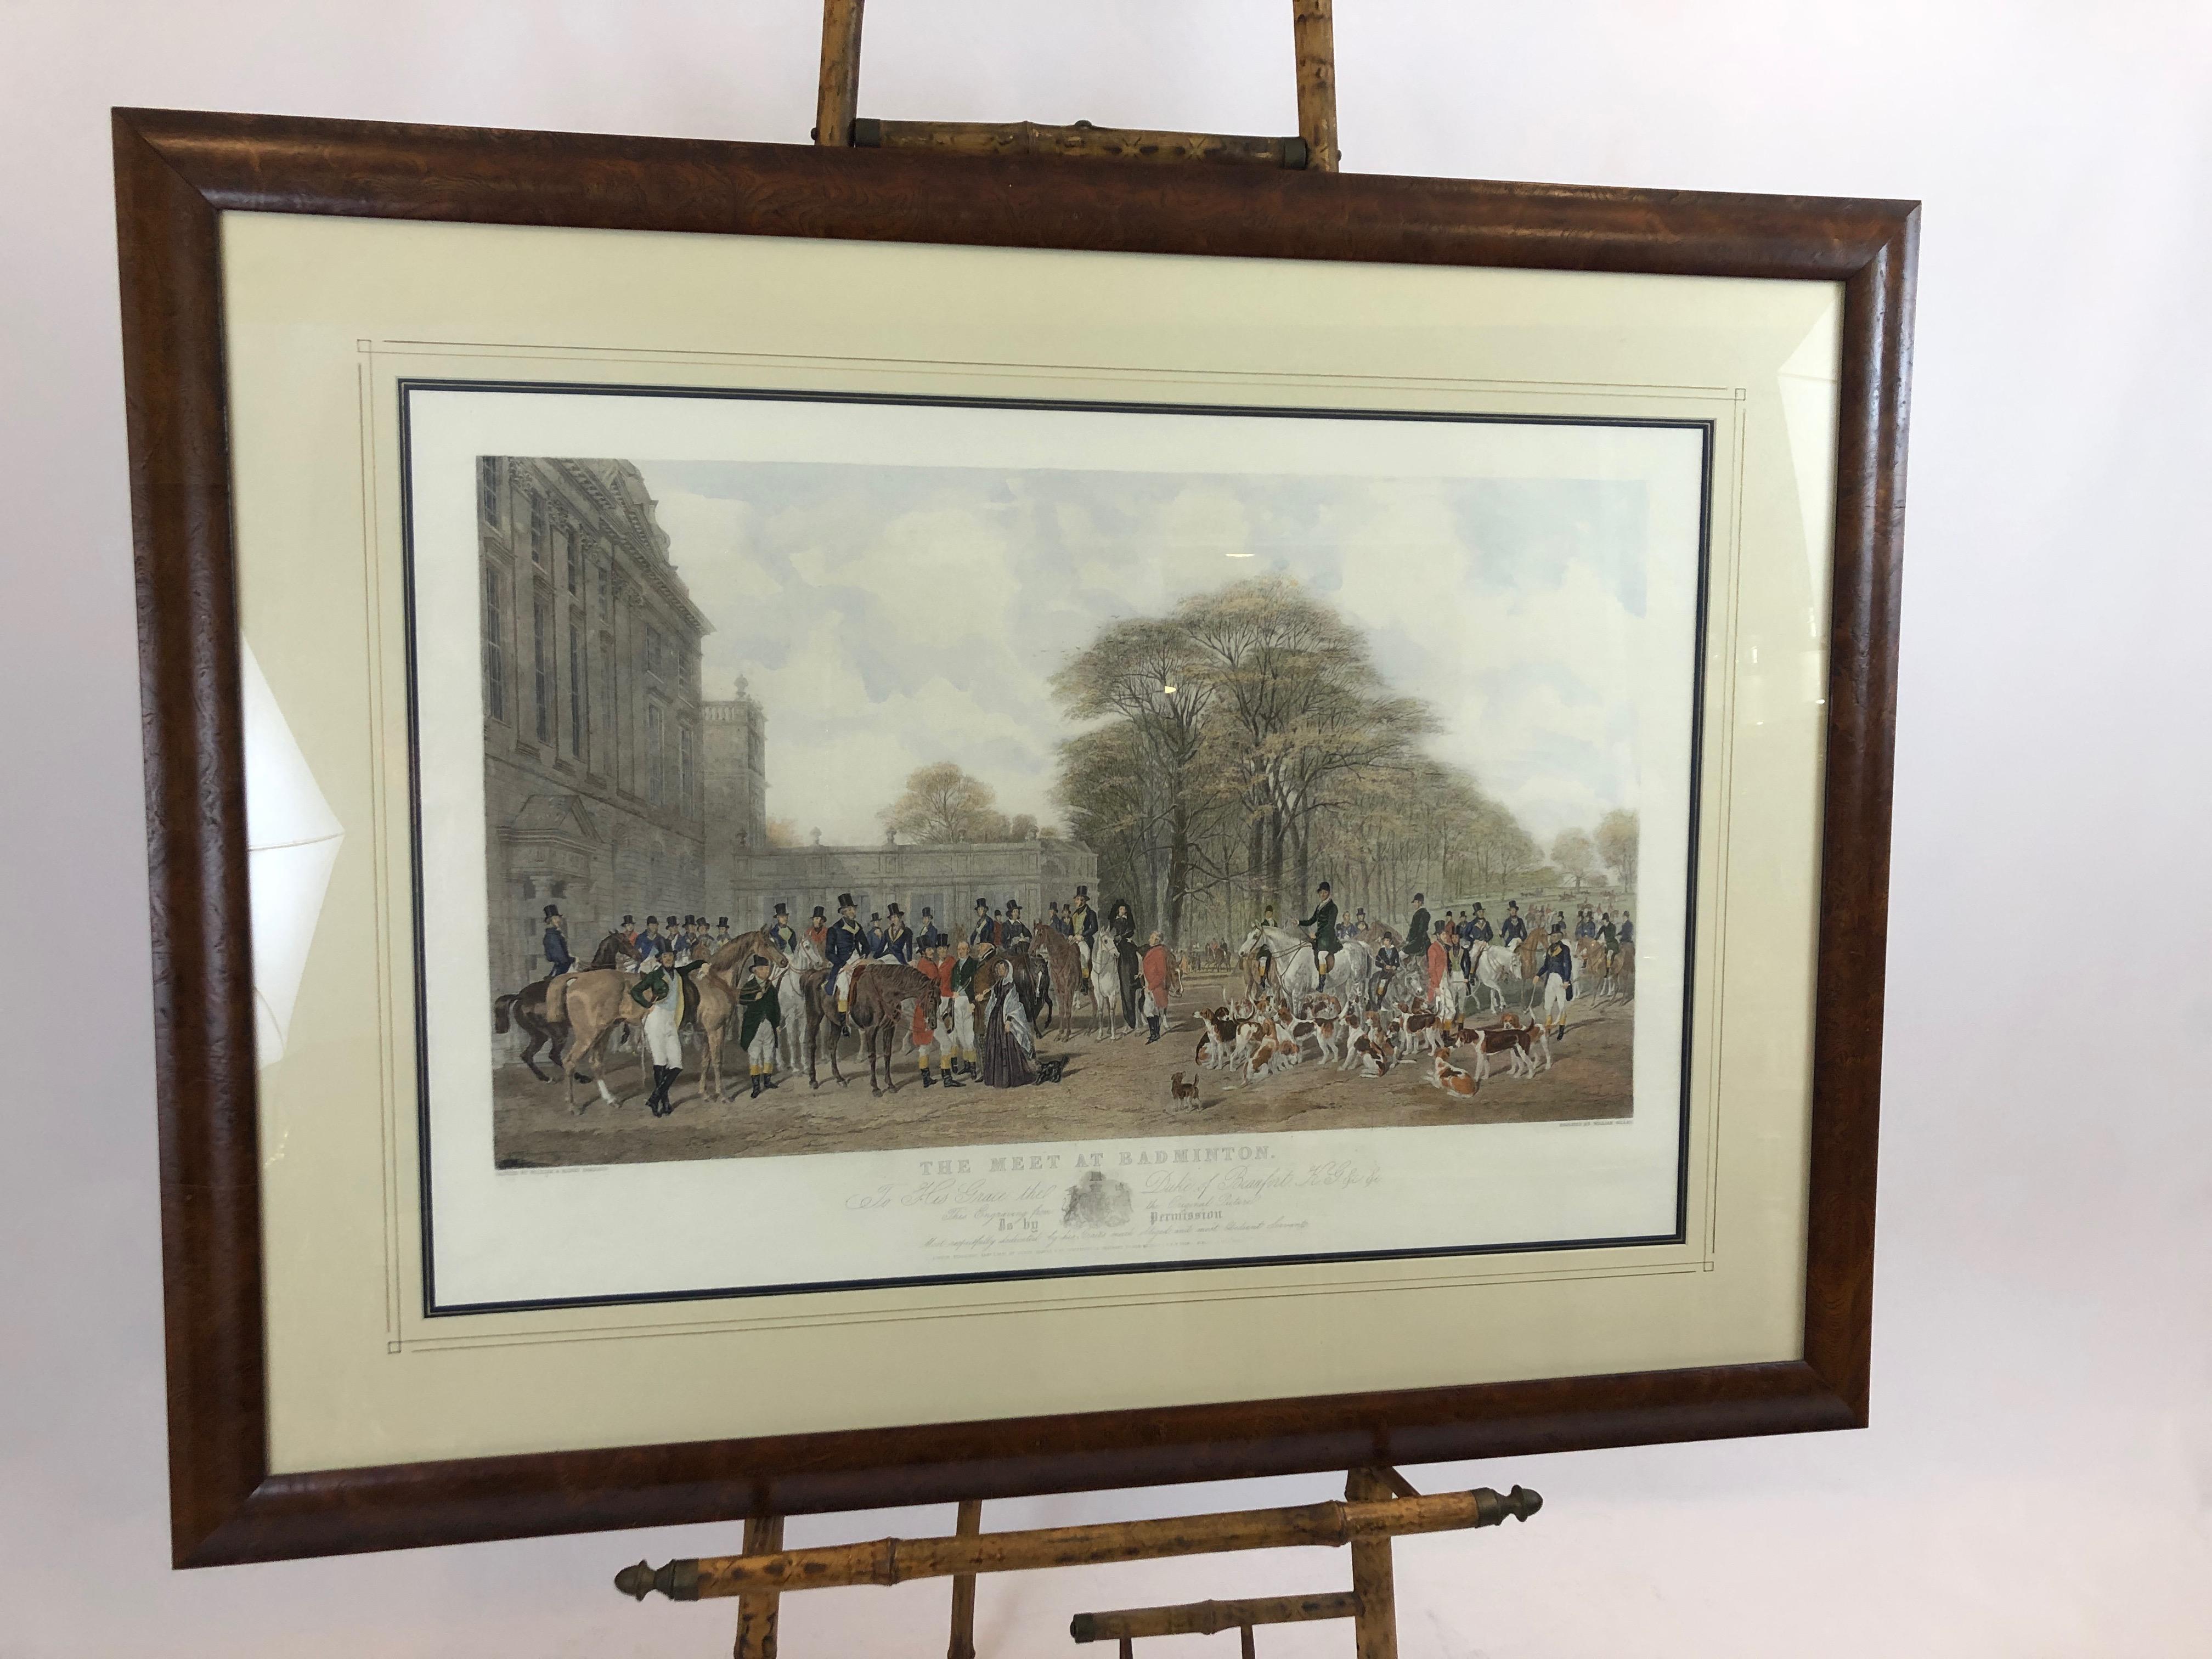 A beautifully French matted and handsome burl wood framed very large English engraving titled The Meet at Badminton, having horses, hunt dogs and lots of festivities as the subject in a muted color palette.
Engraving is 32 W x 21 H.